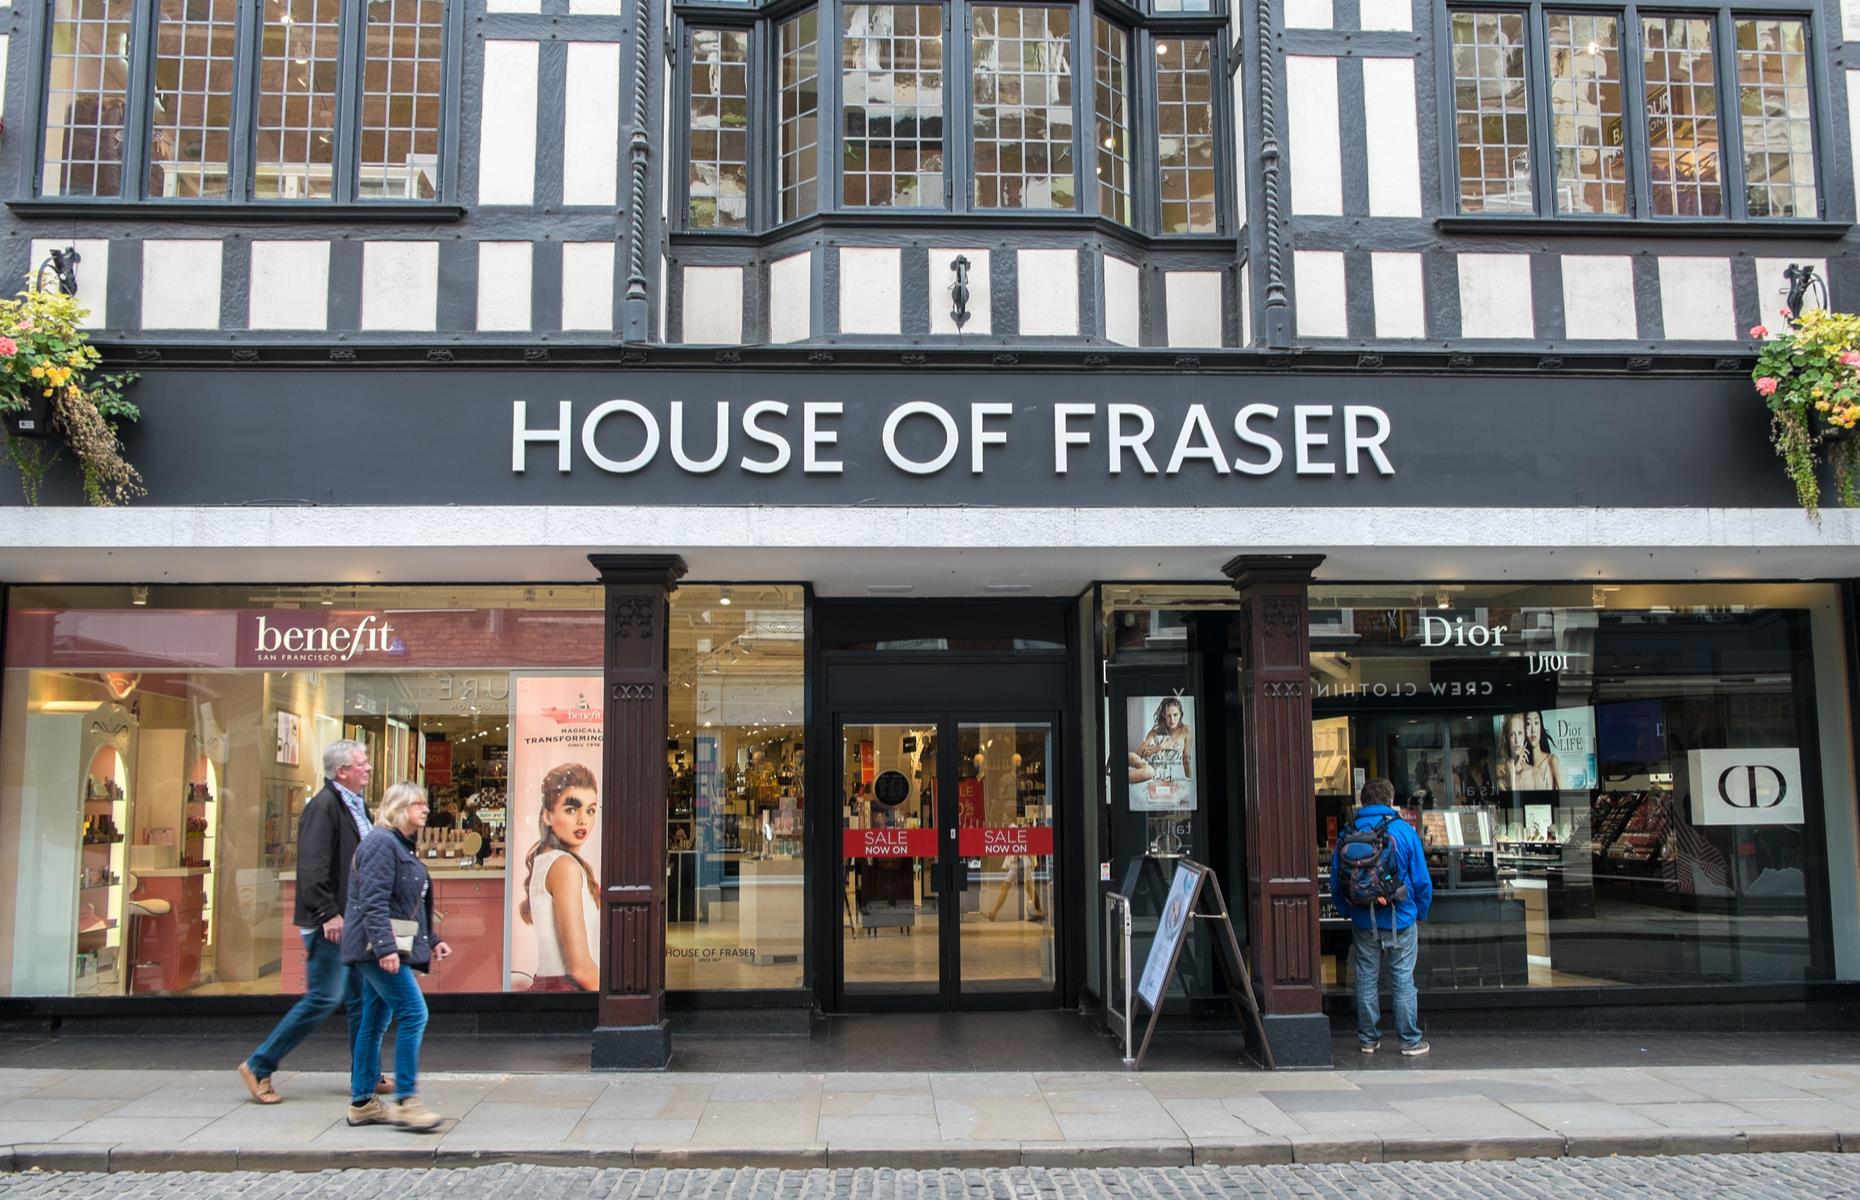 House of Fraser started out in Scotland